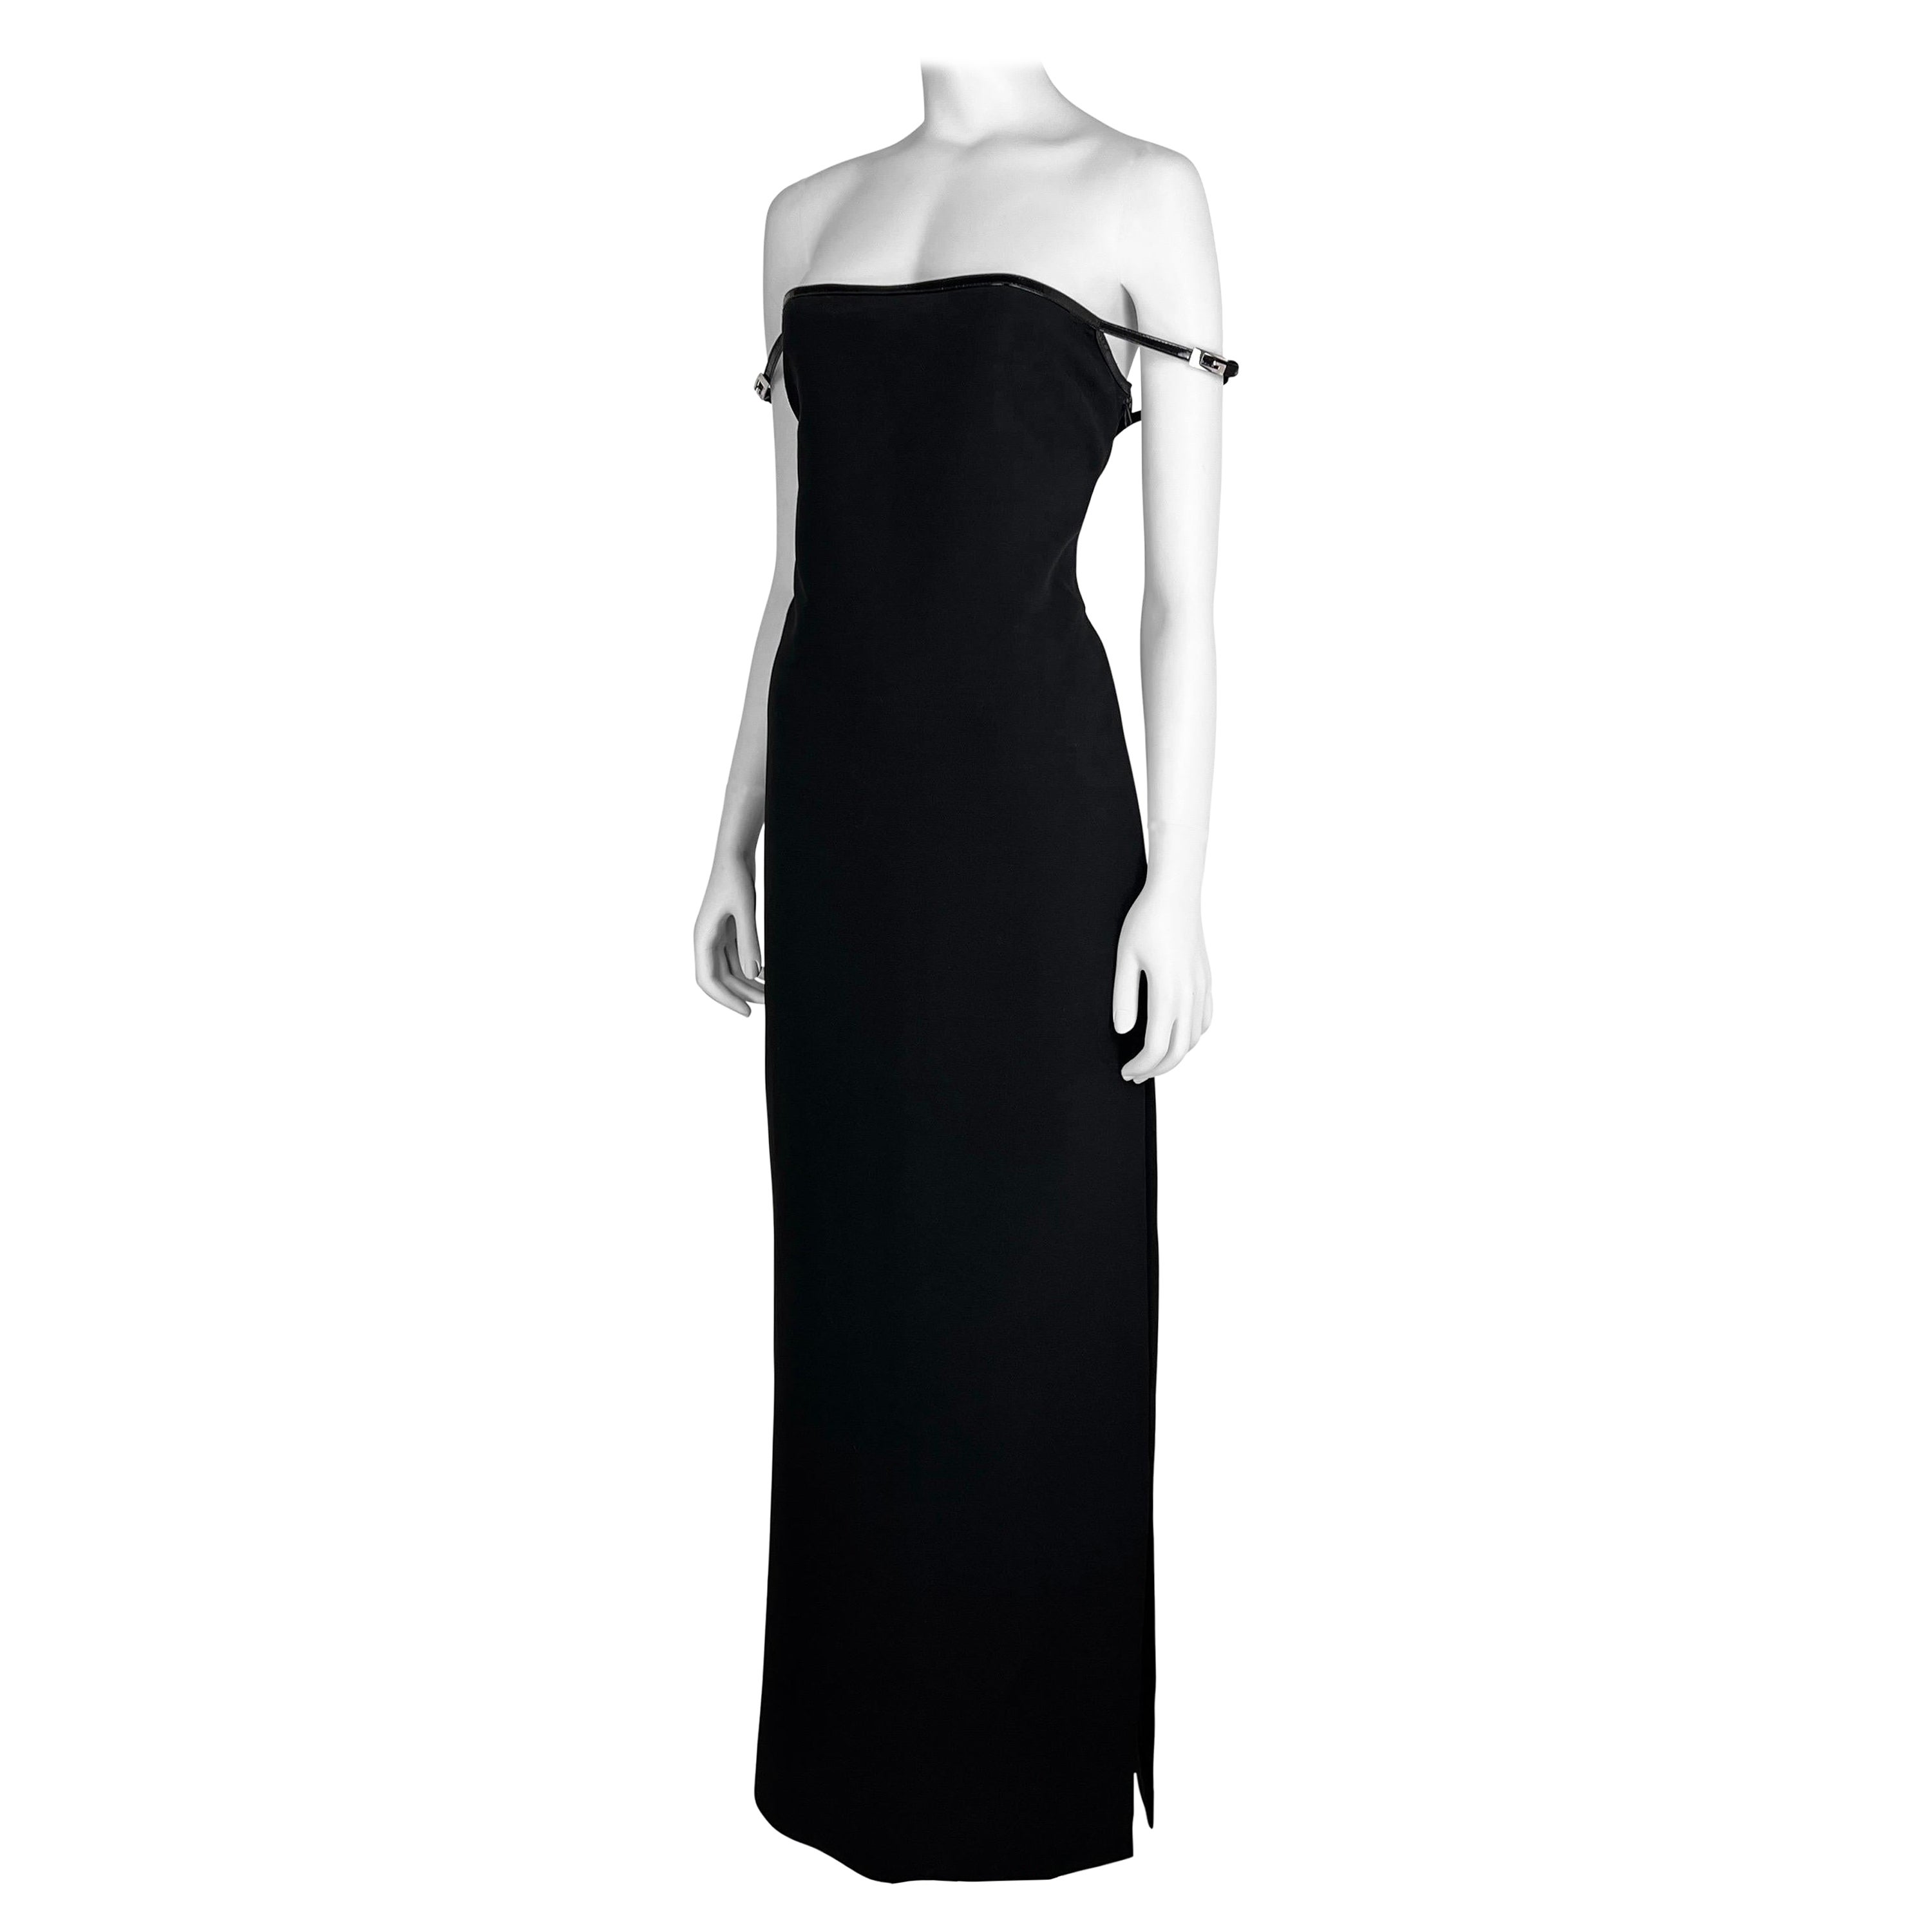 Gucci by Tom Ford Fall 1997 G-logo Strap Evening Black Dress For Sale